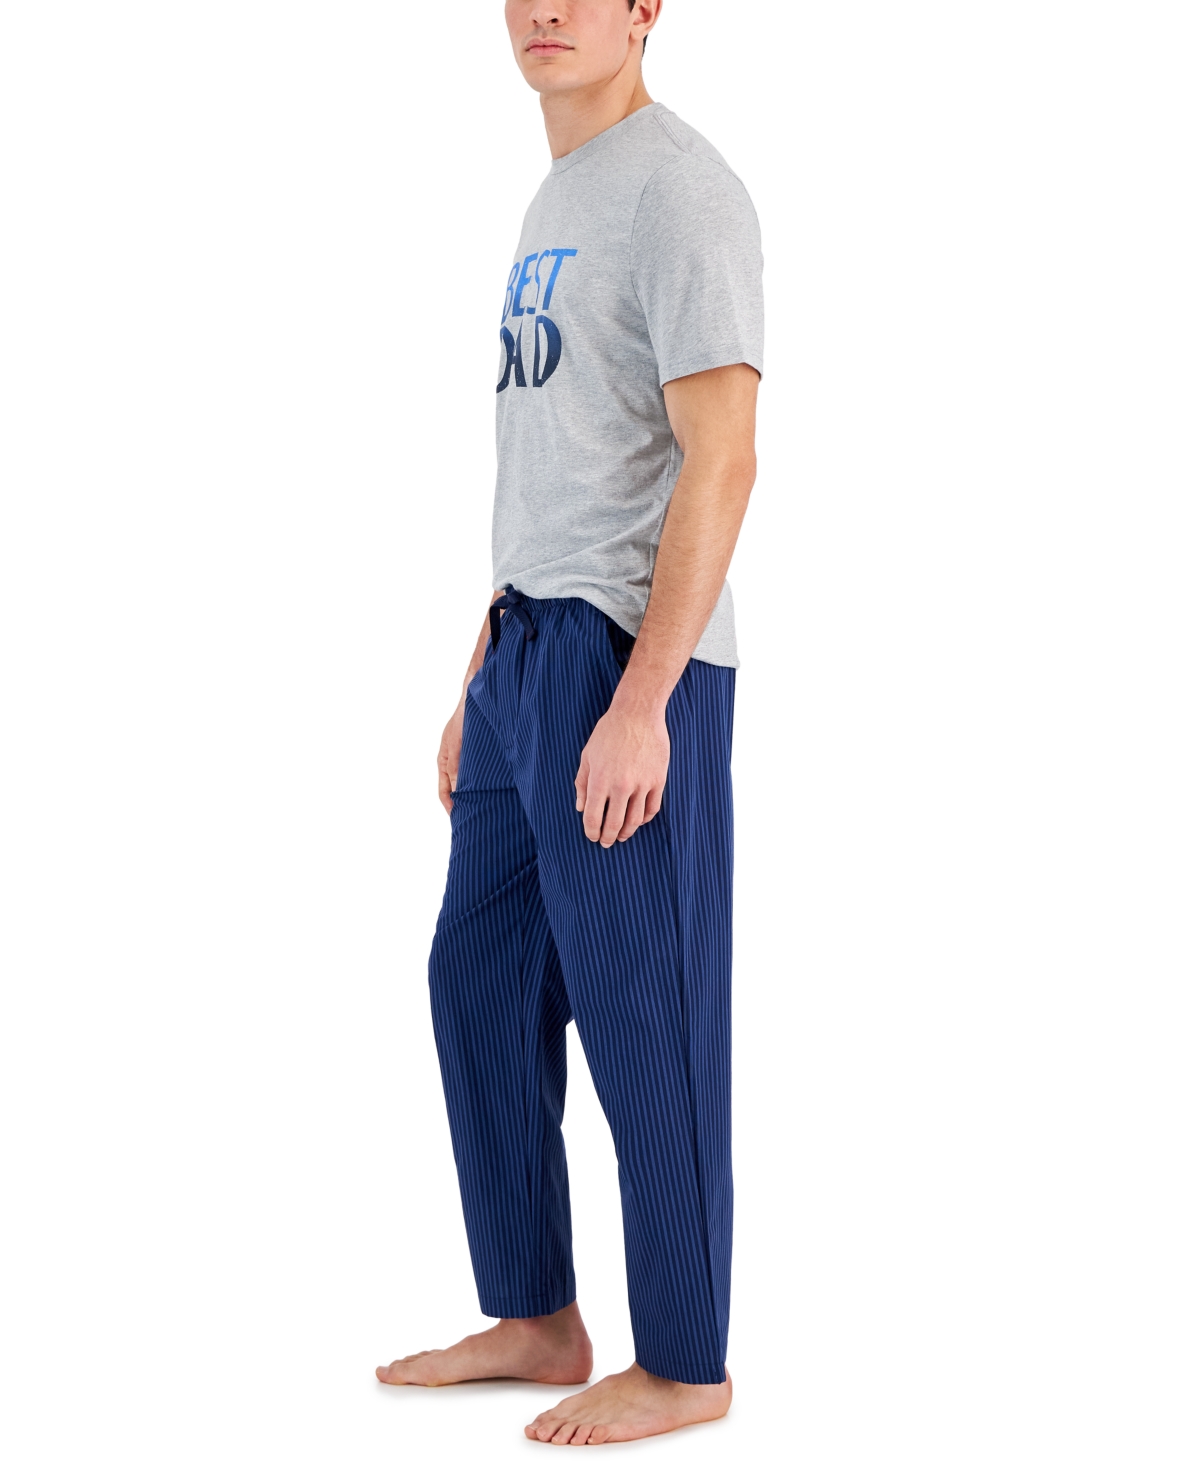 Shop Club Room Men's 2-pc. Best Dad Graphic T-shirt & Stripe Pajama Pants Set, Created For Macy's In Fday Set